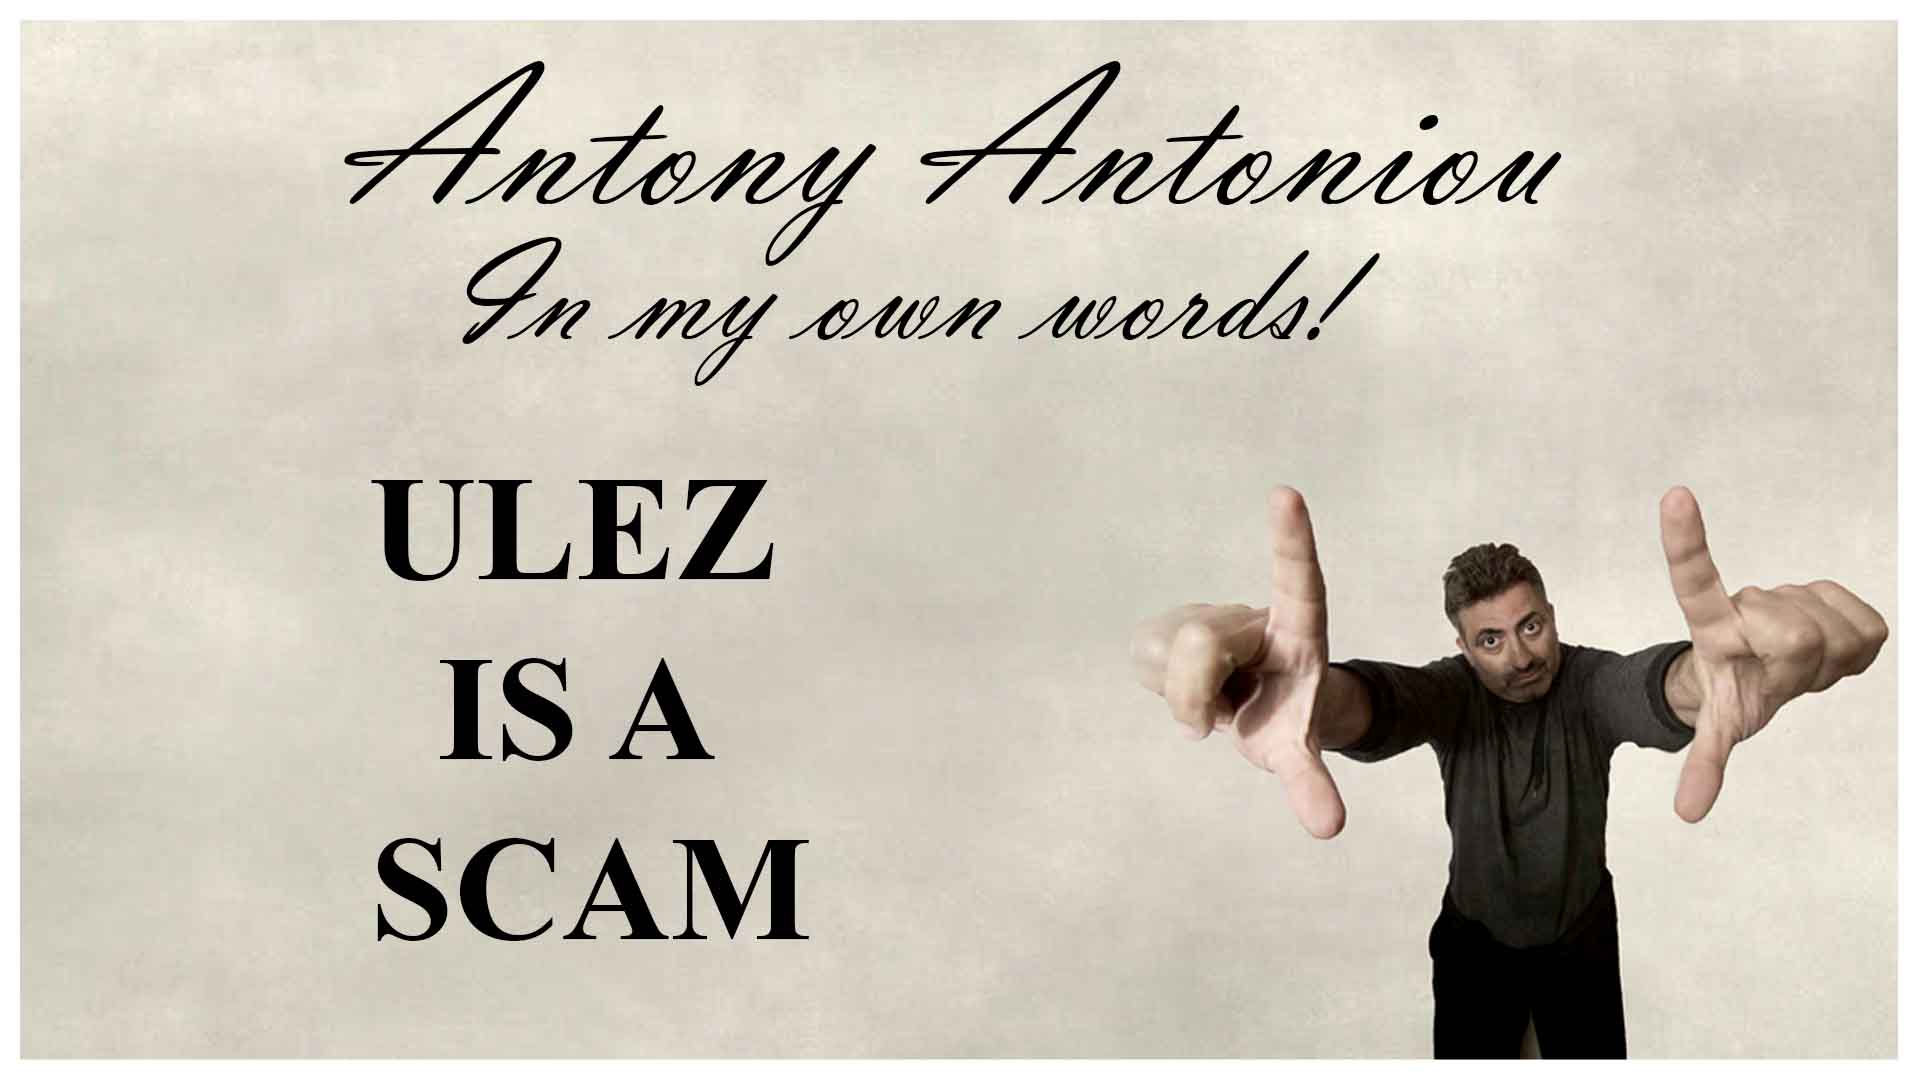 ULEZ is a Scam